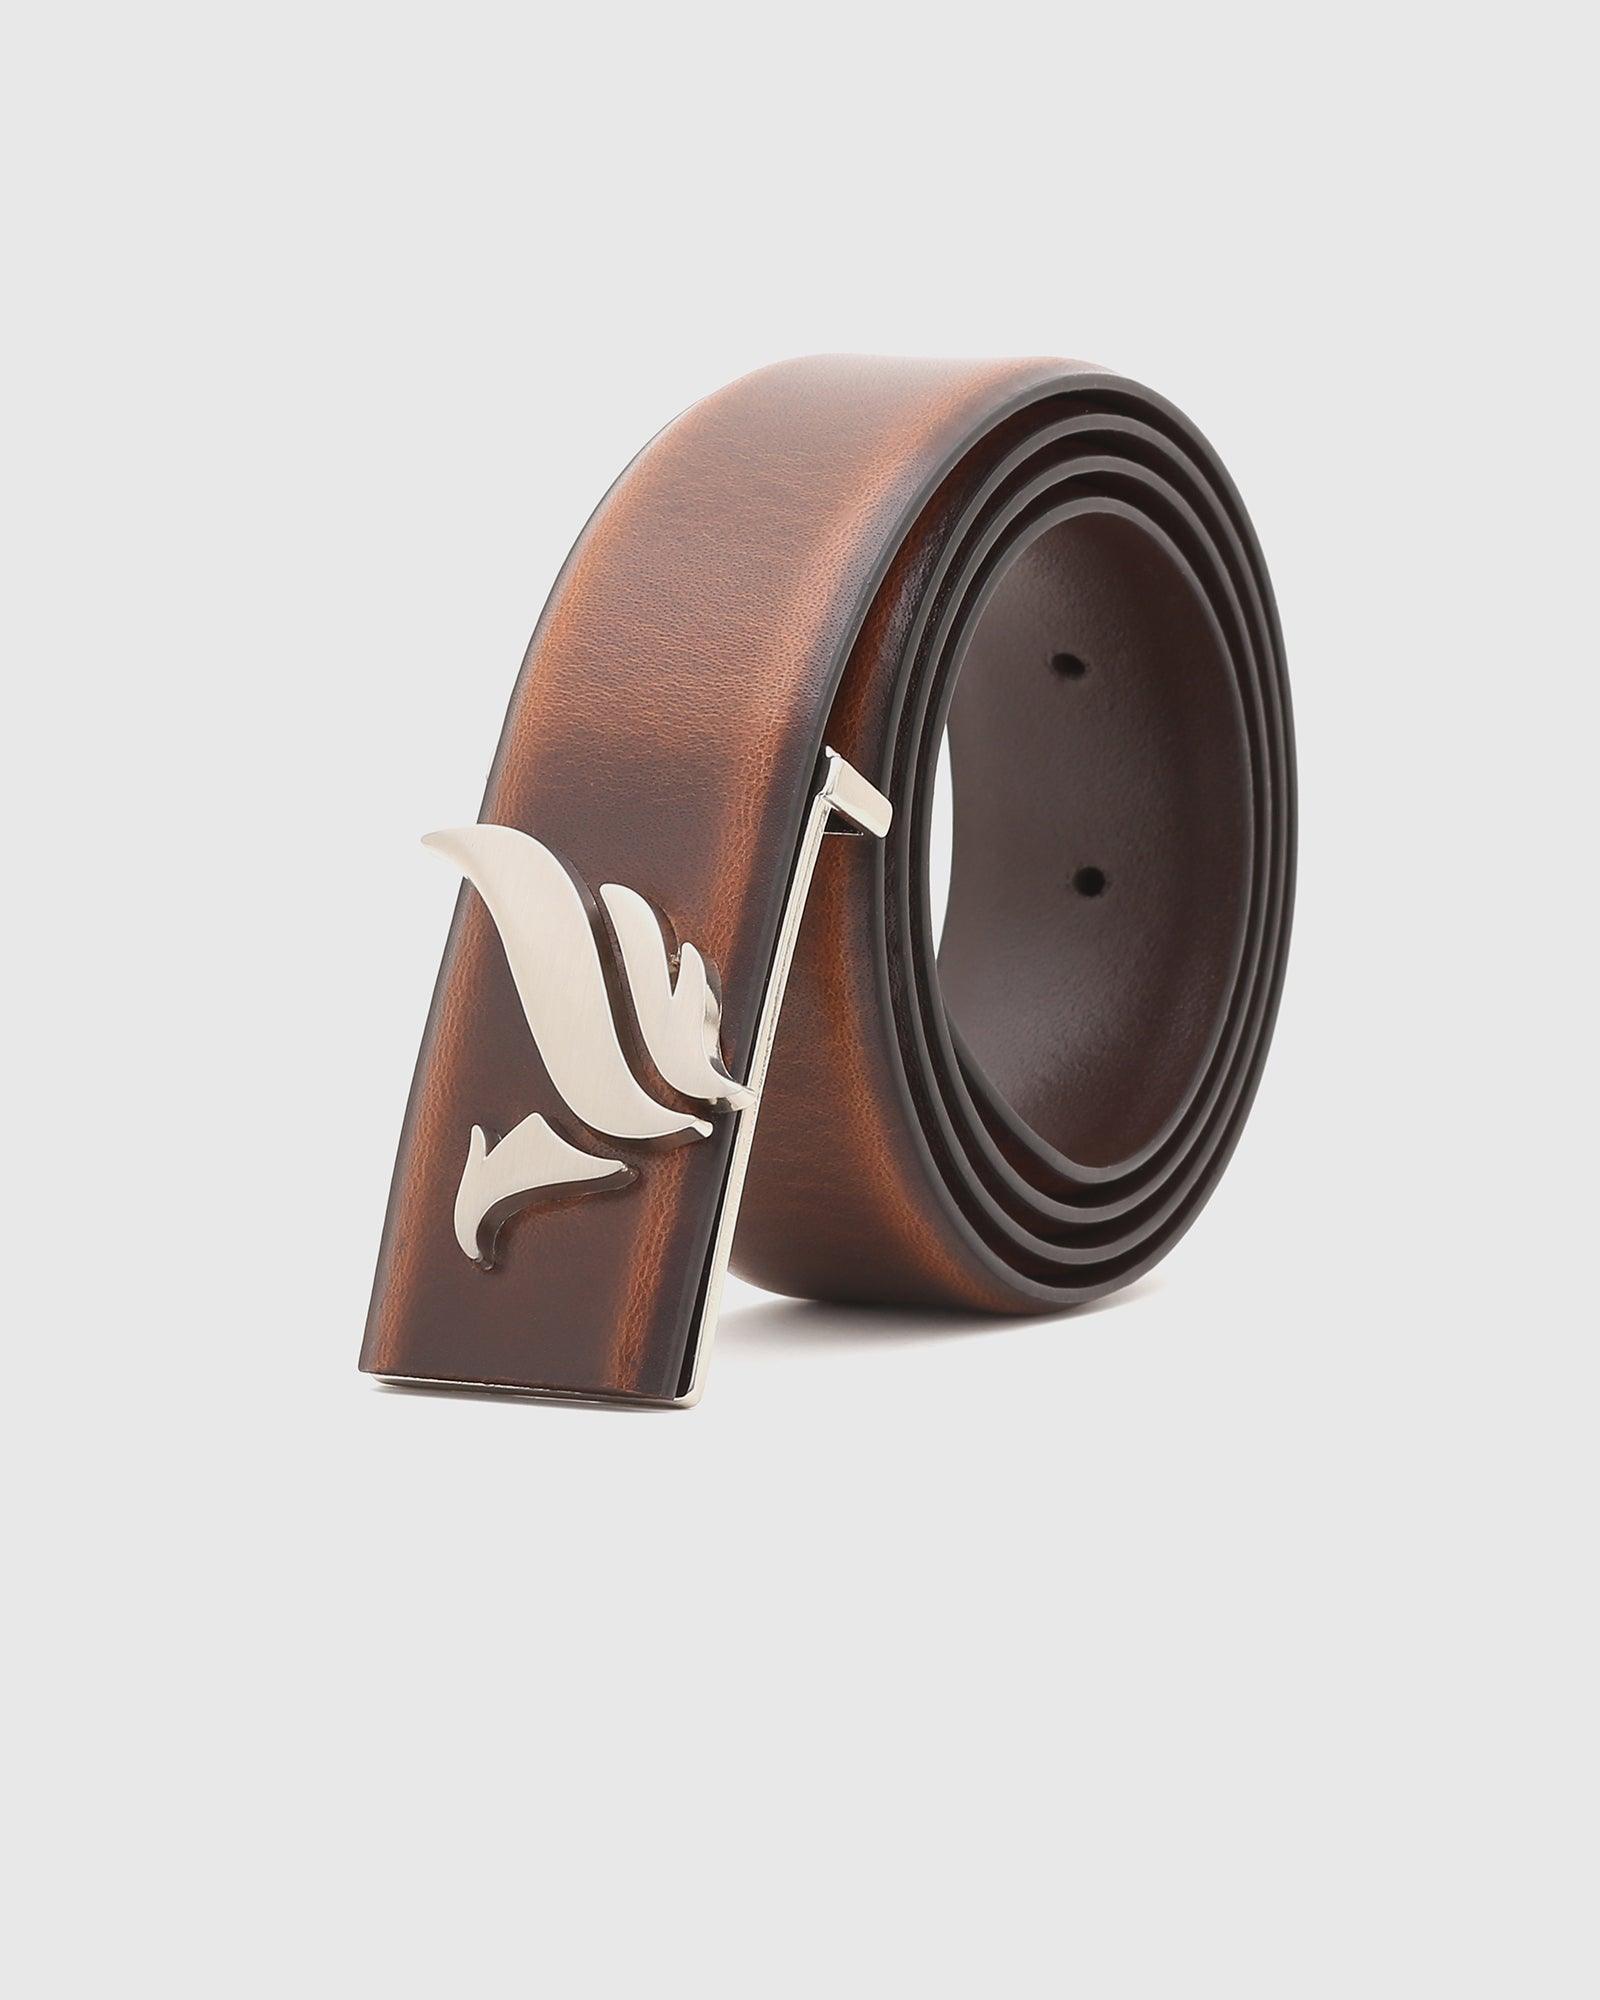 Must Haves Leather Tan Textured Belt - New Halley - Blackberrys